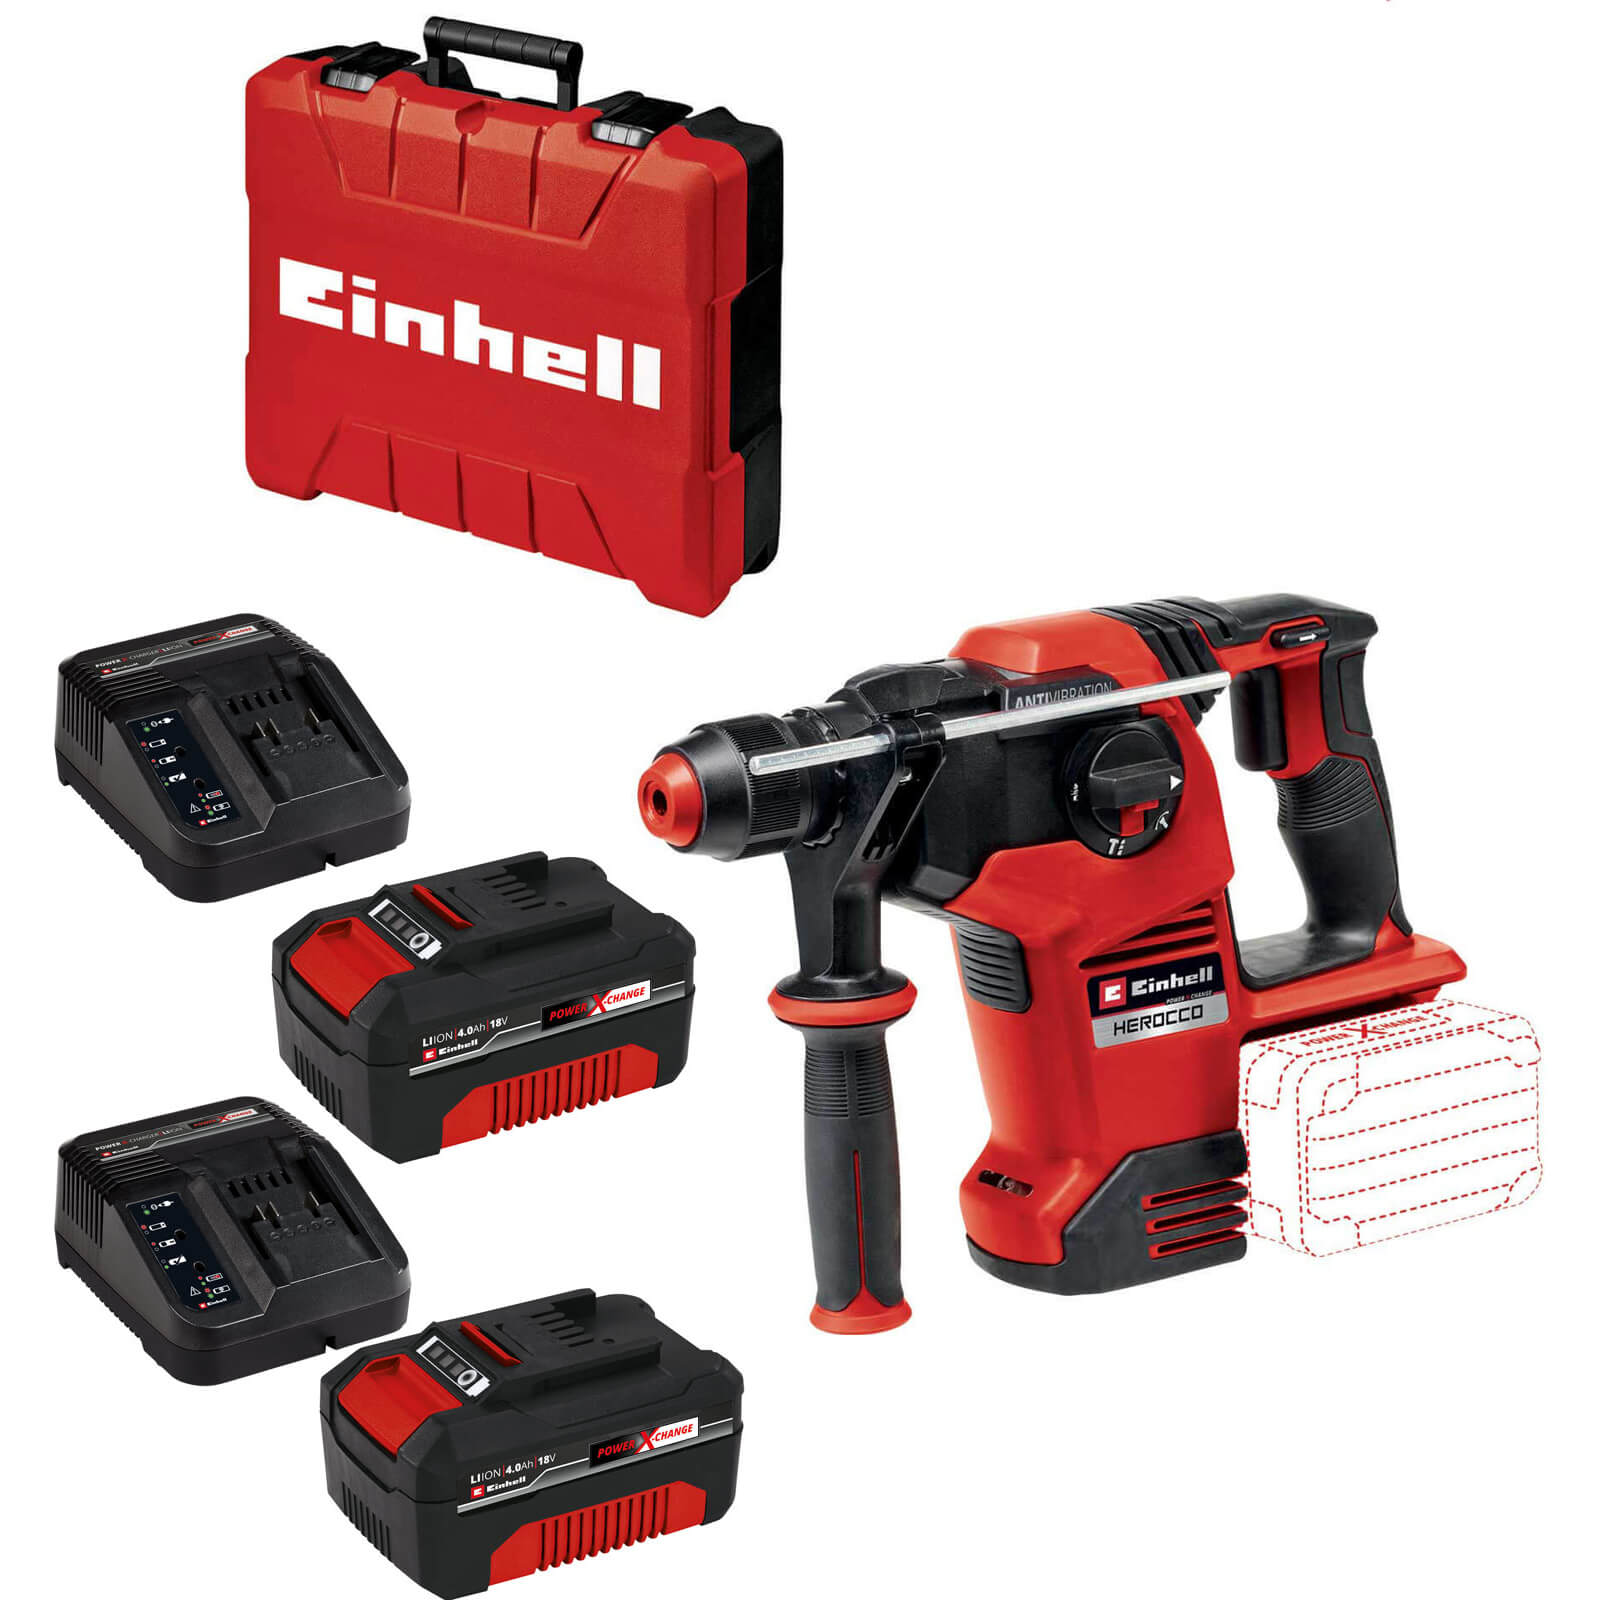 Image of Einhell HEROCCO 36/28 36v Cordless Brushless SDS Plus Rotary Hammer Drill 2 x 4ah Li-ion Charger Case